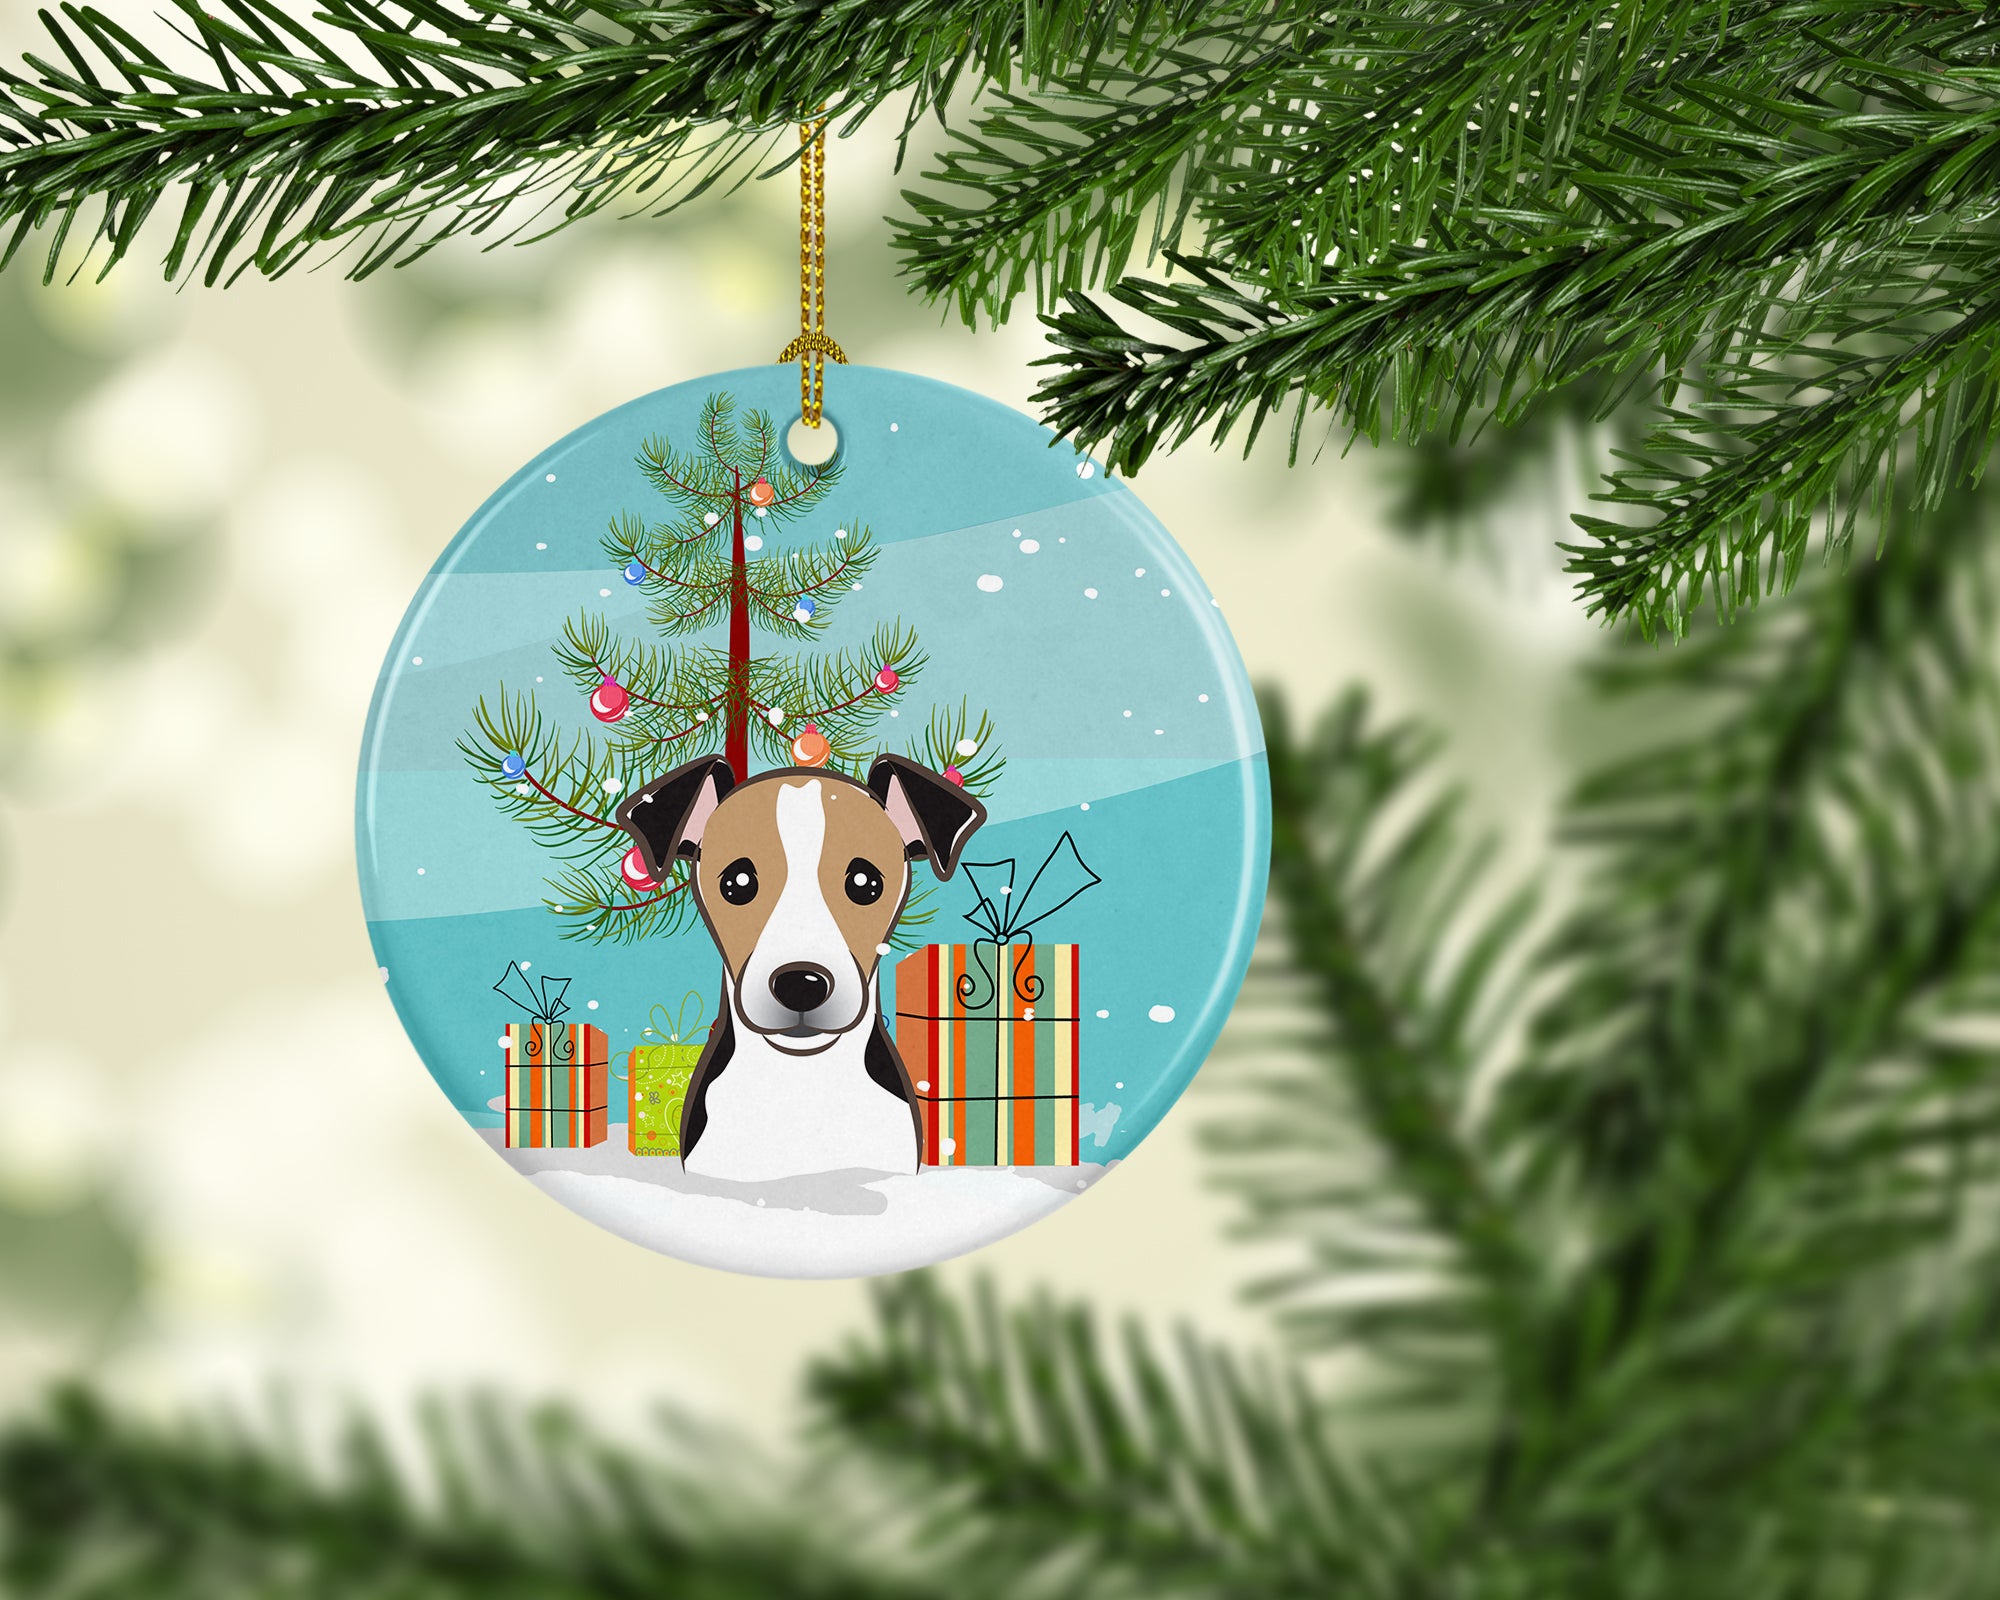 Christmas Tree and Jack Russell Terrier Ceramic Ornament BB1633CO1 - the-store.com